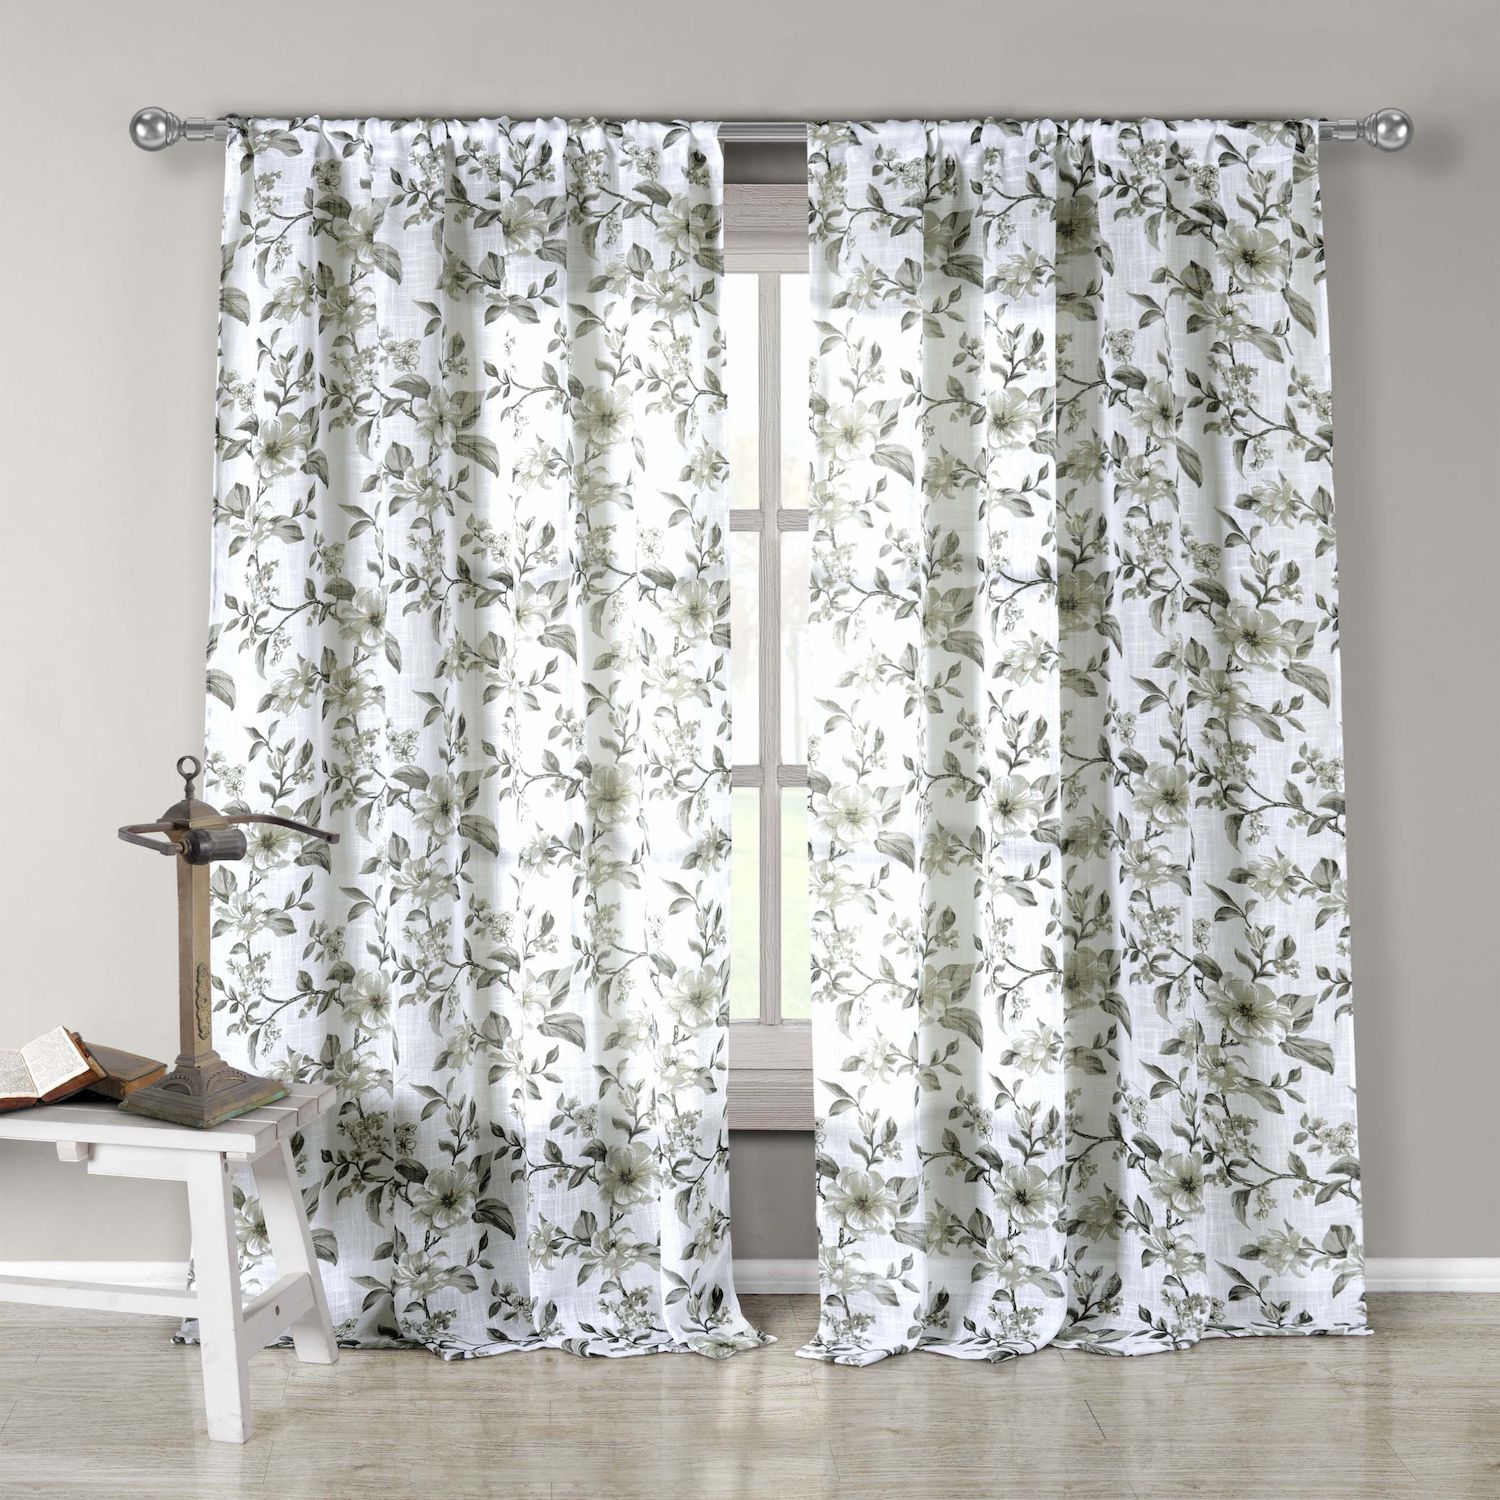 Image for Duck River Textile Lylia Solid 2-pack Window Curtain Set at Kohl's.